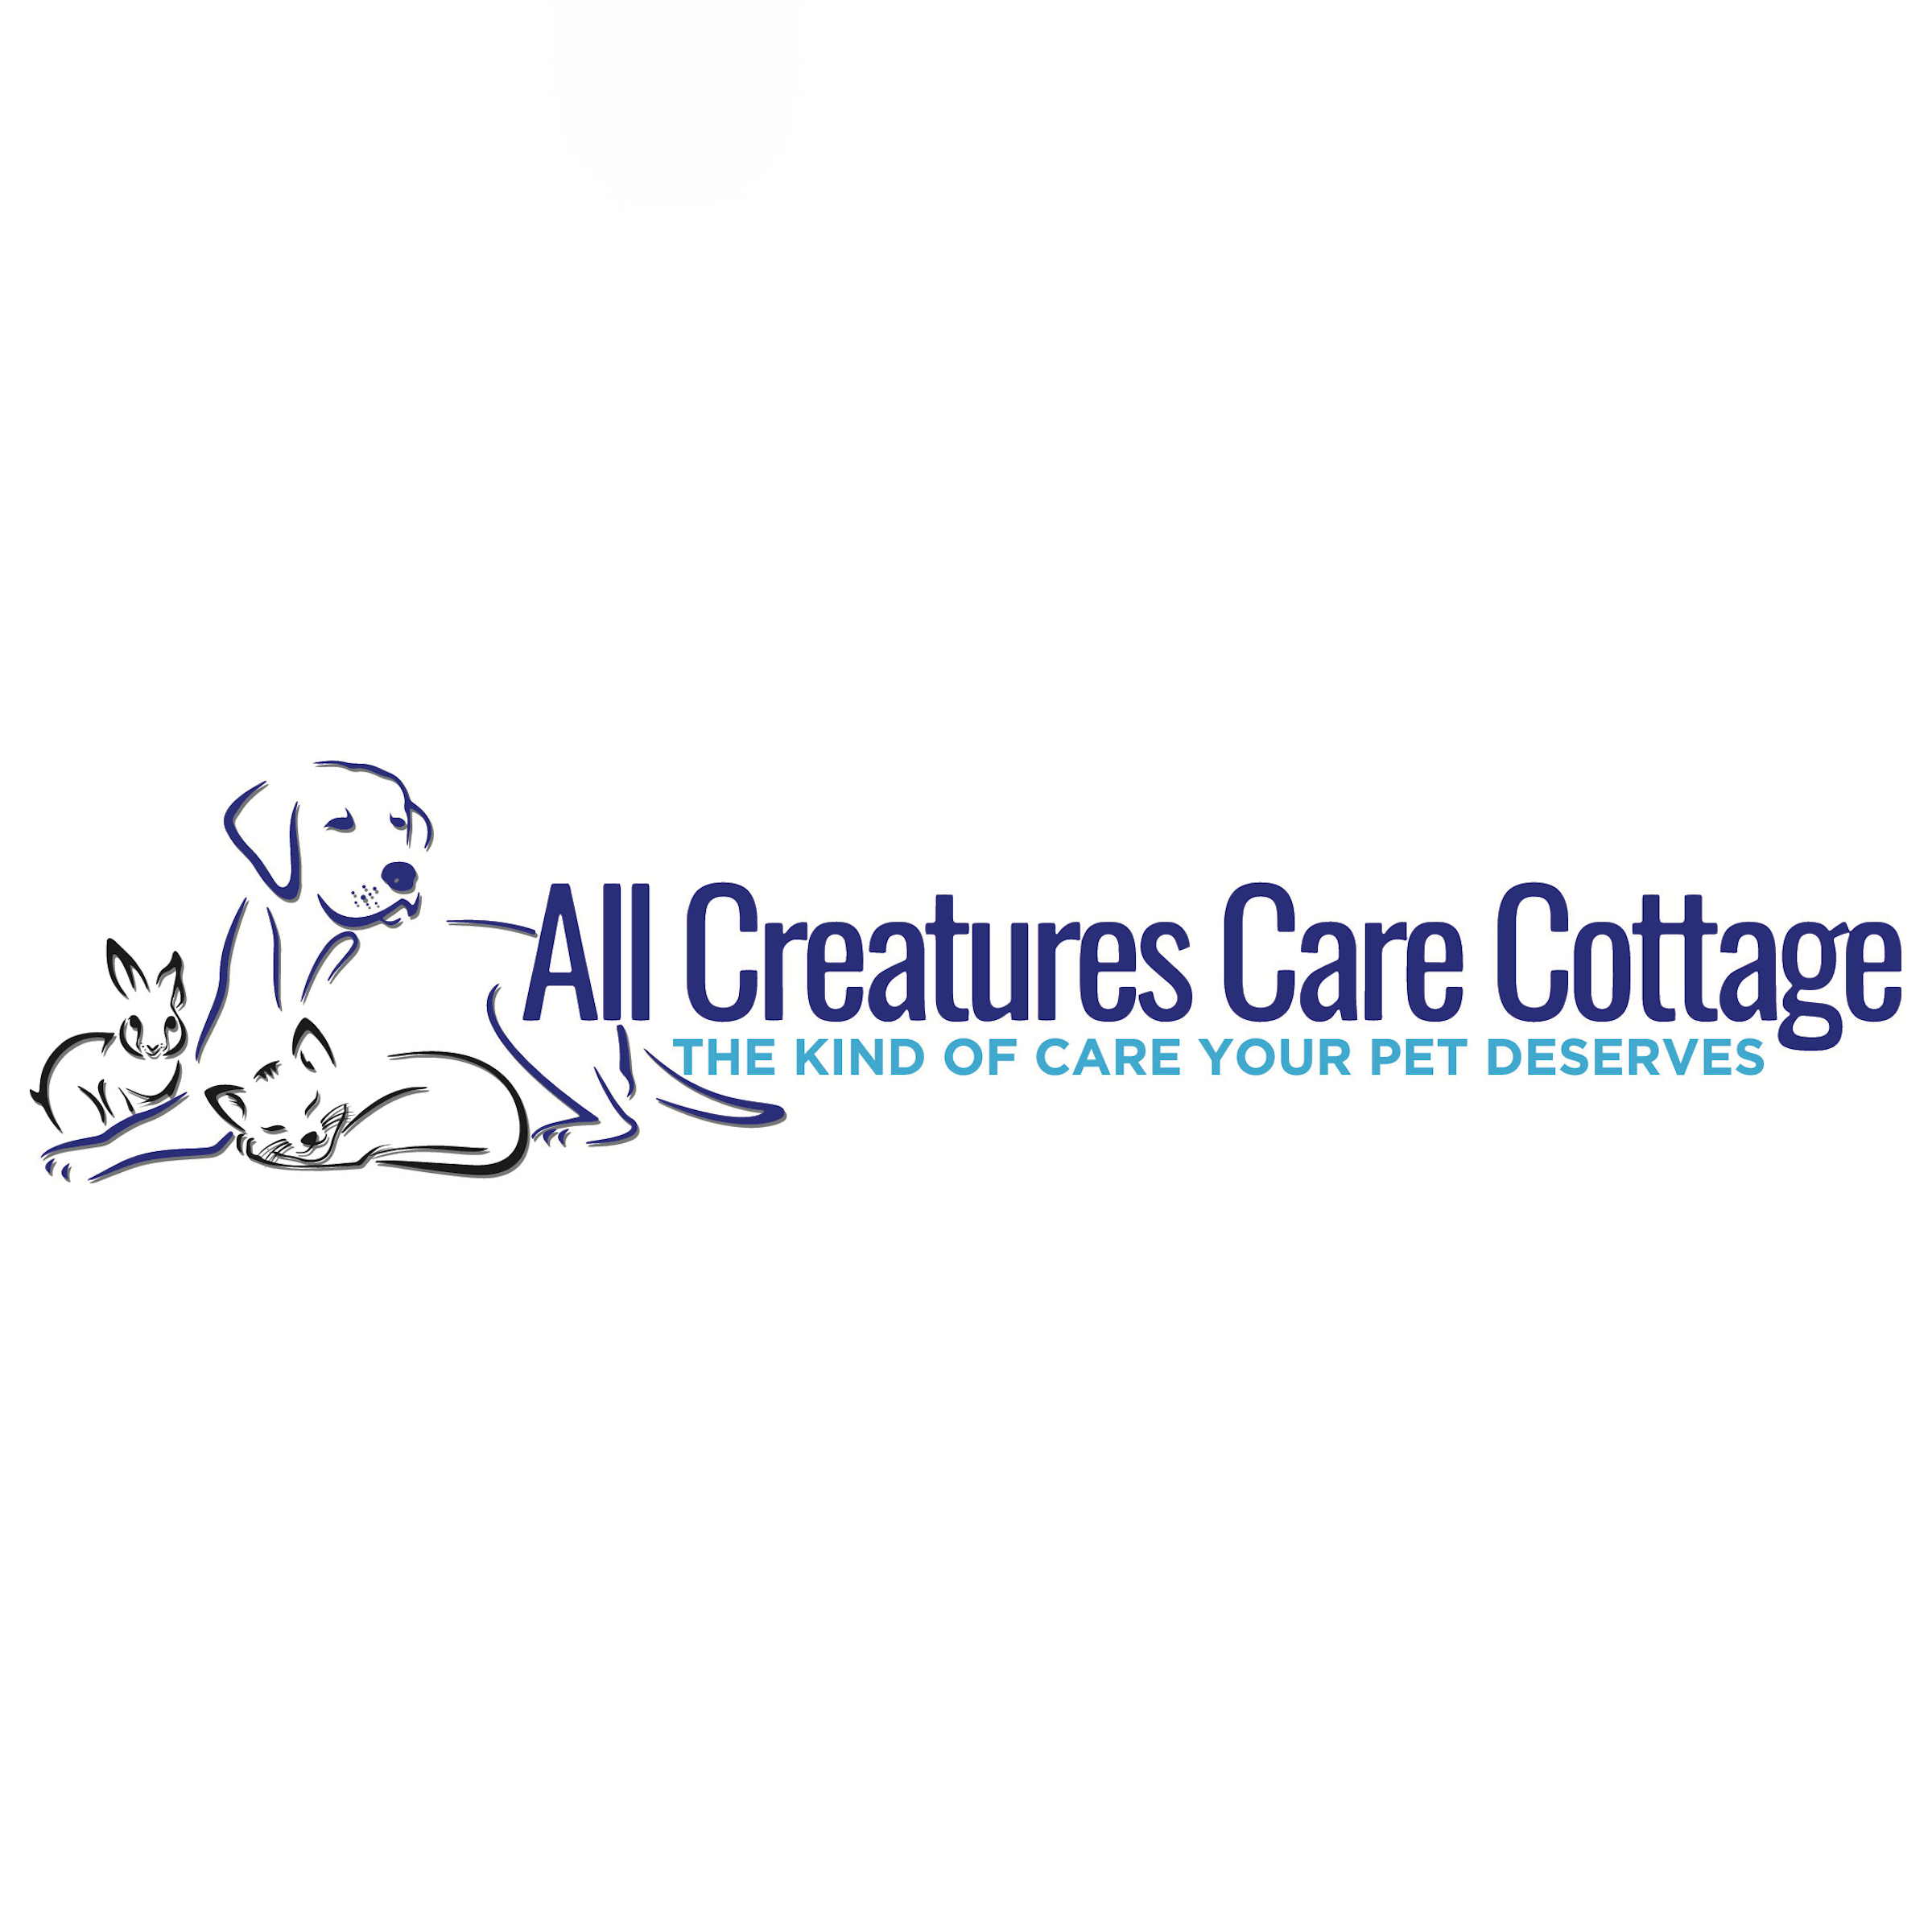 All Creatures Care Cottage